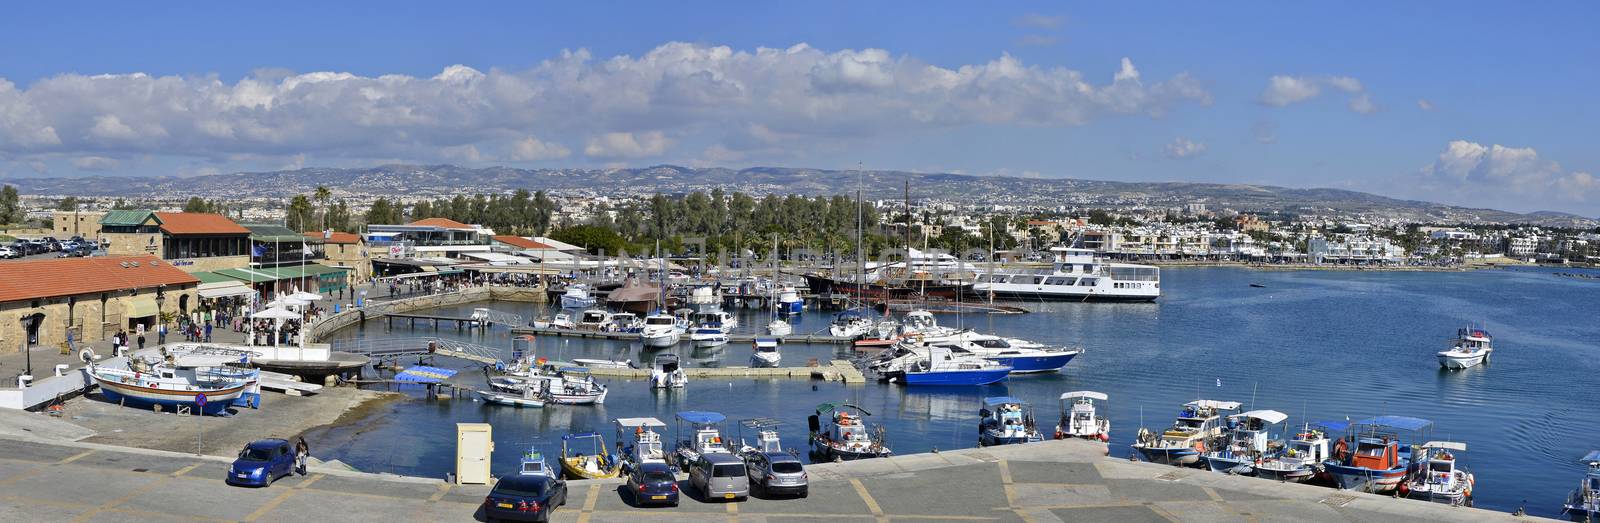 Panoramic Picture of the busy Harbour at Paphos Cyprus by GardenWizard365